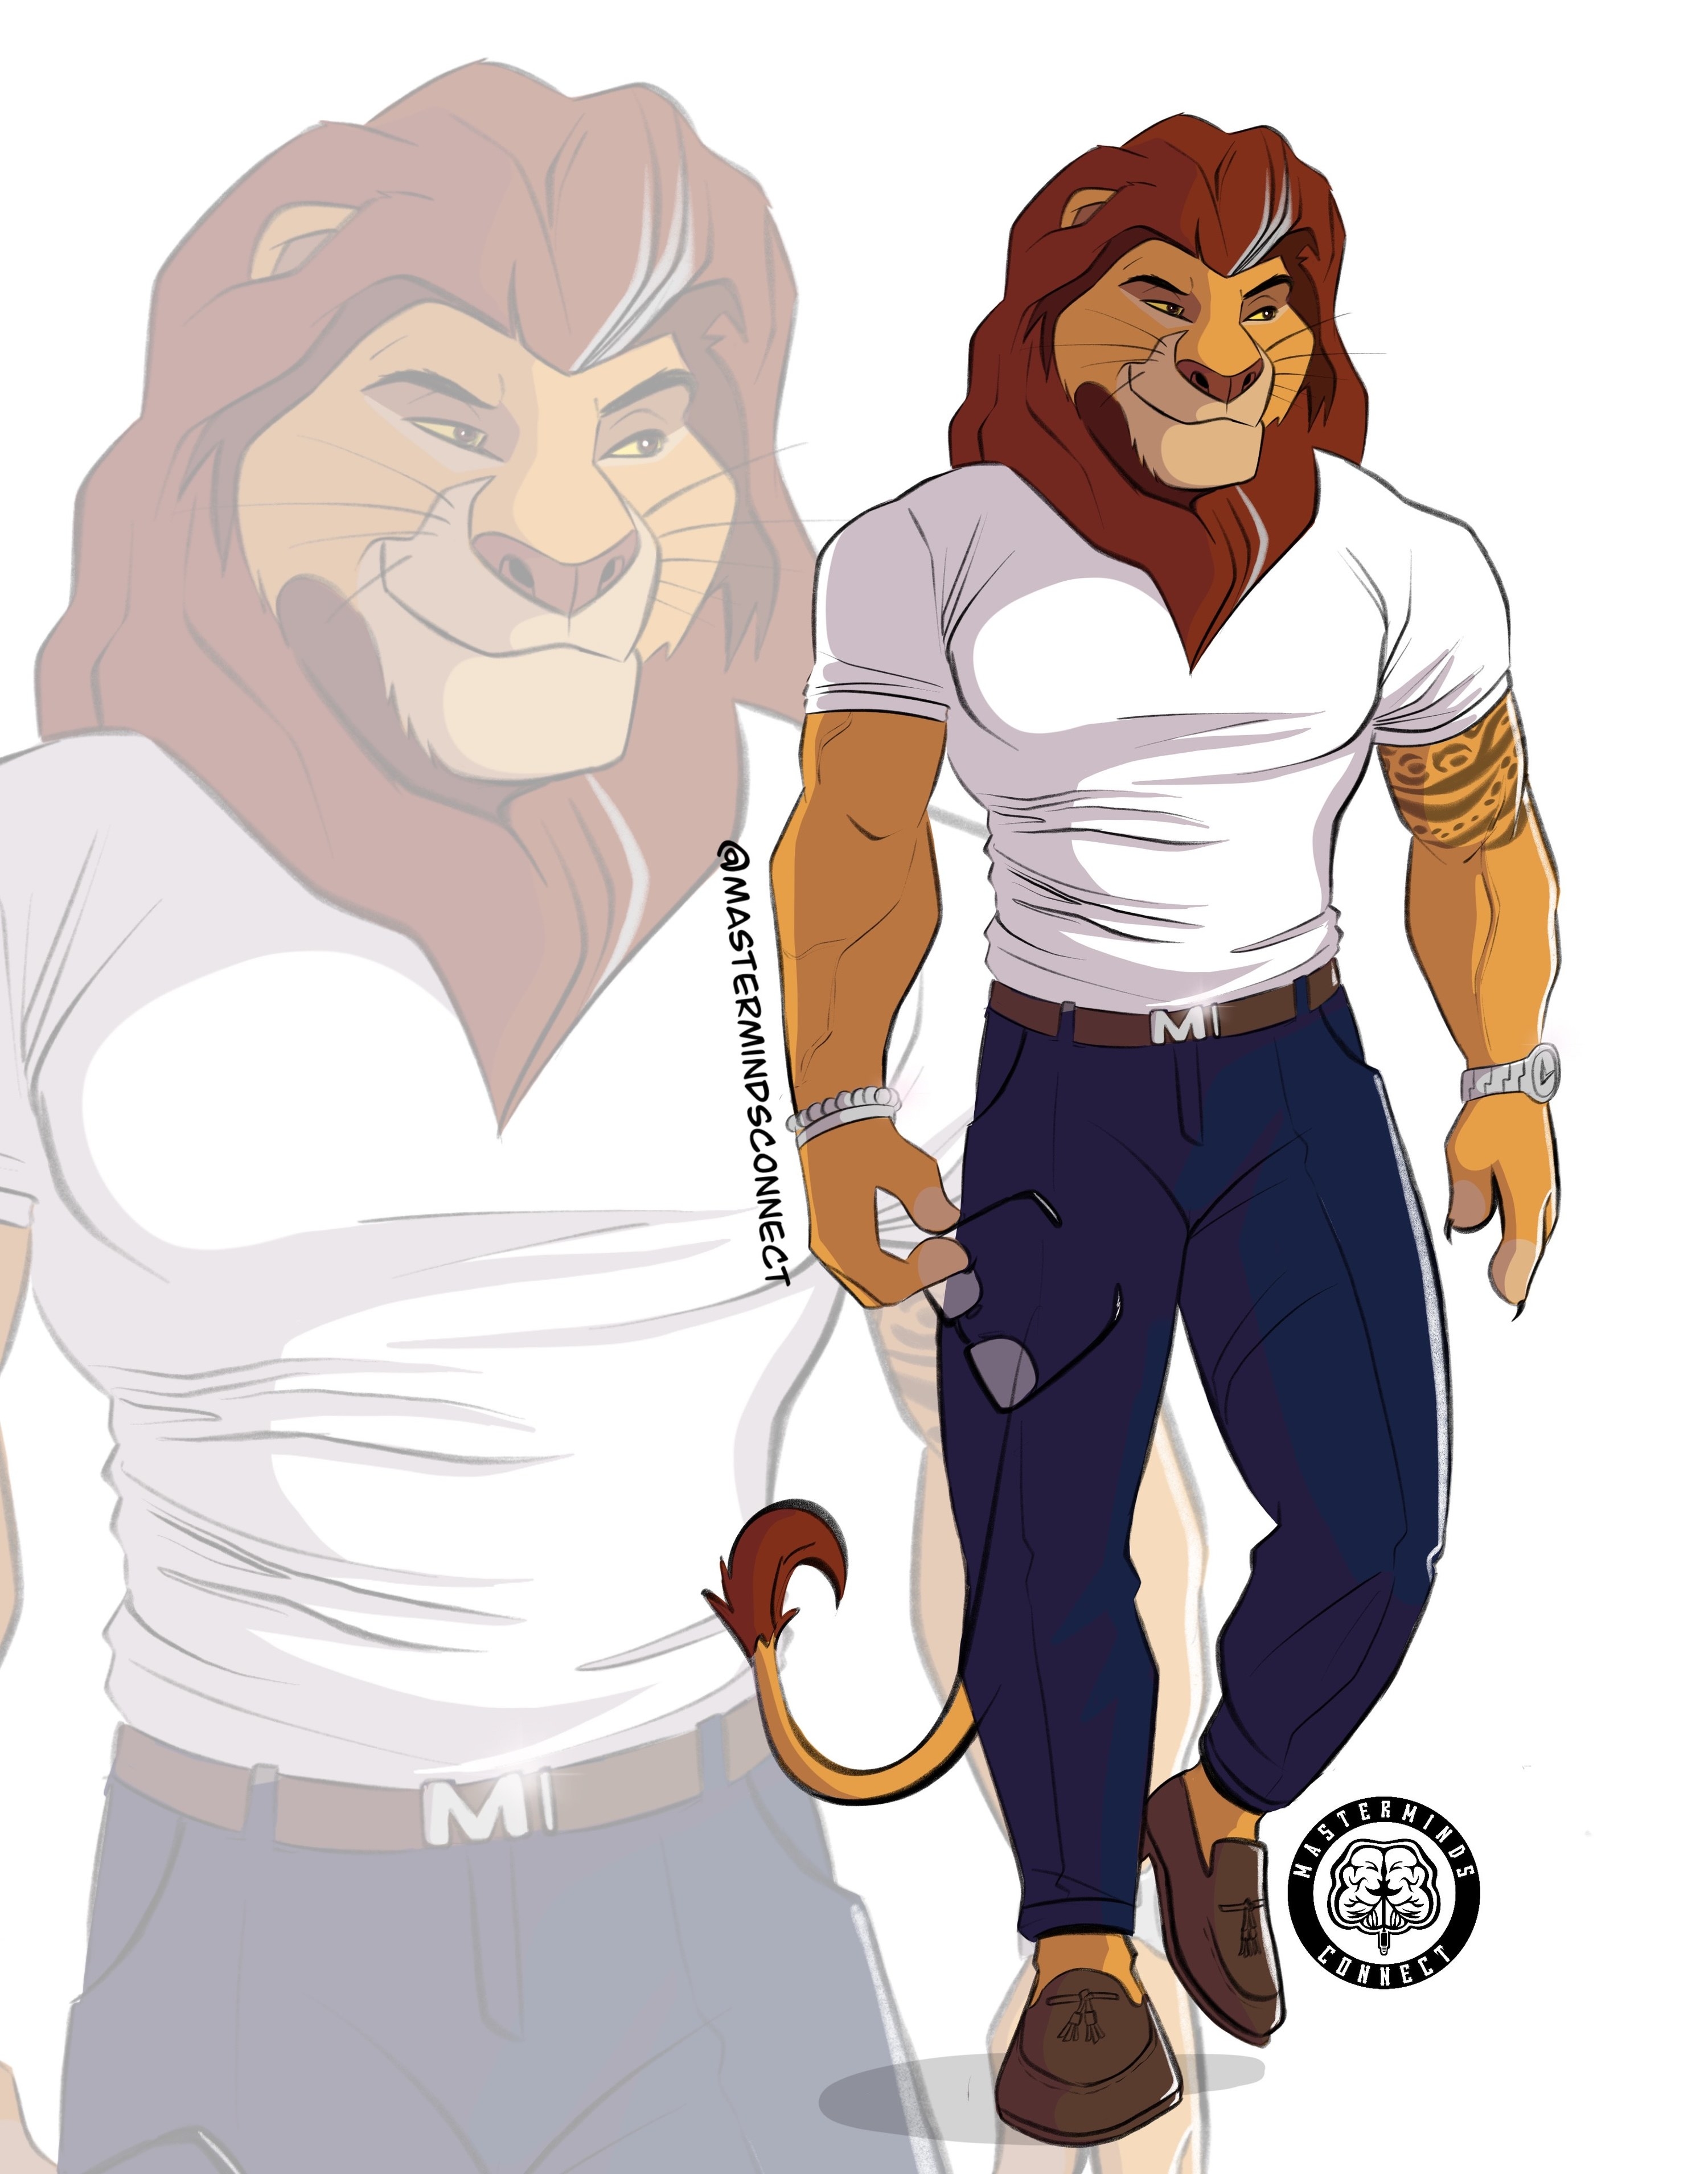 This Artist Is Spending His Quarantine Drawing “The Lion King” Characters  As Humans